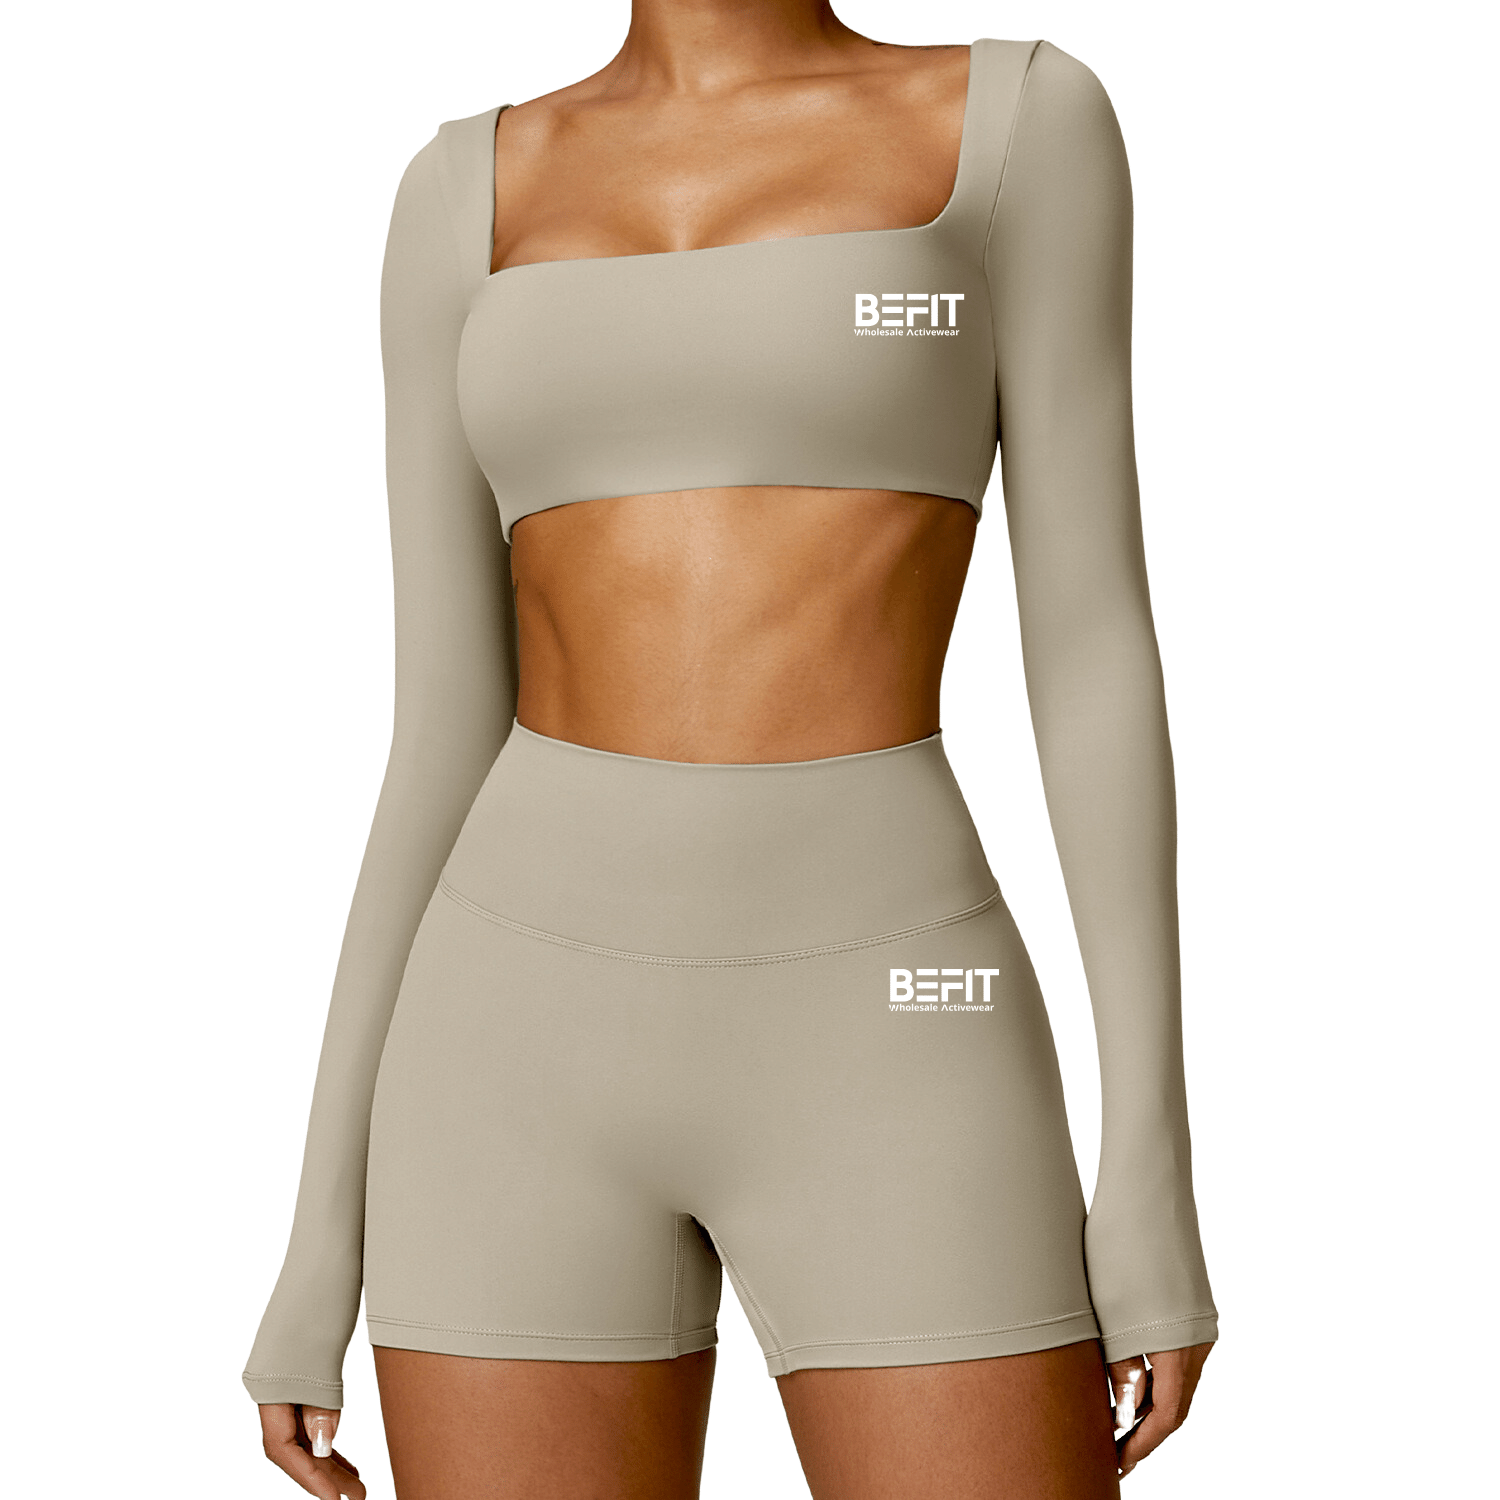 Women's Wholesale Tight Long-Sleeved Top